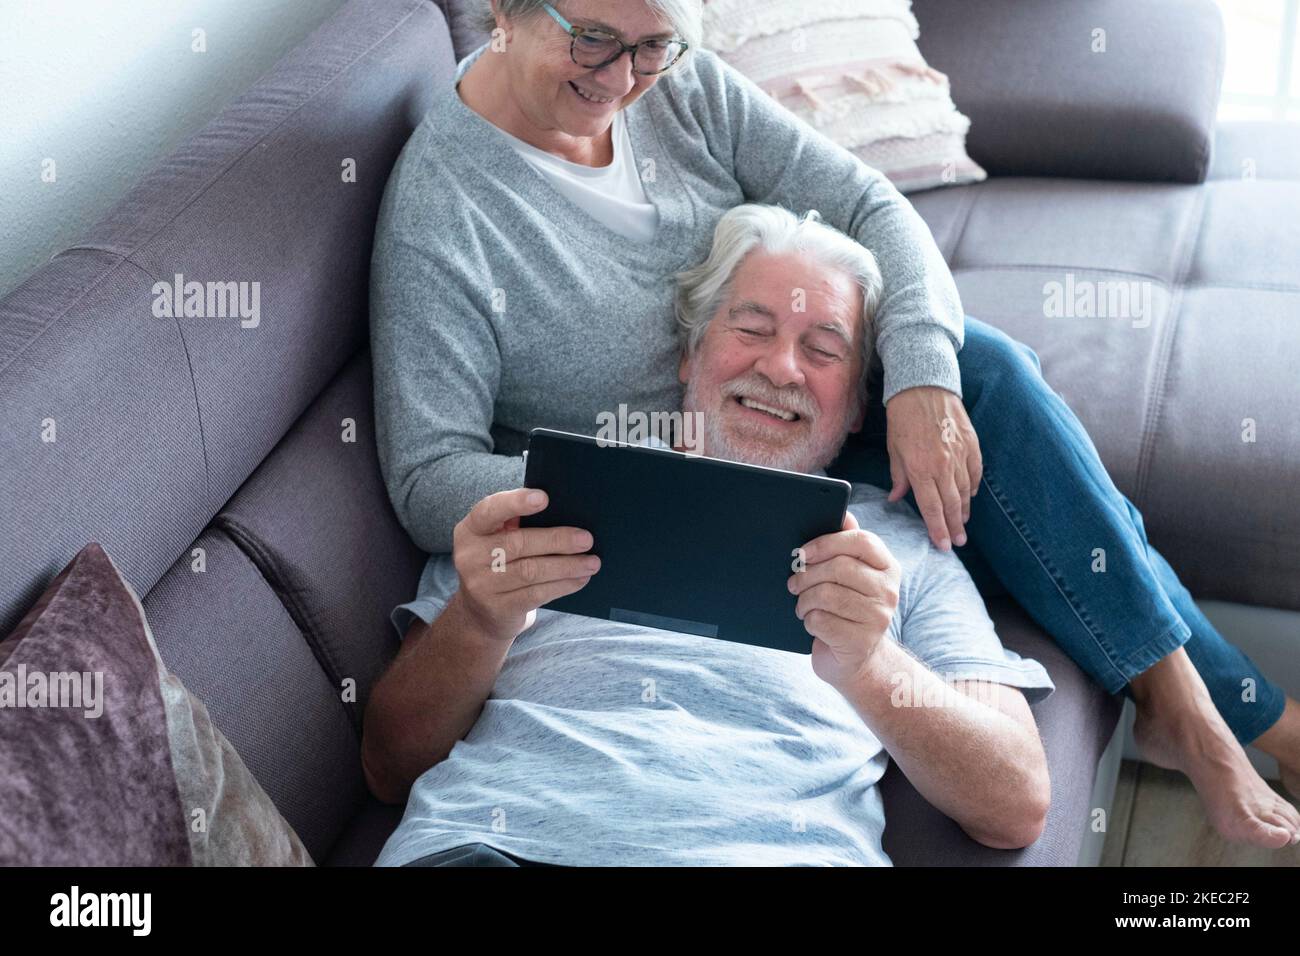 couple of two seniors or mature people at home having fun together looking at the same tablet - pensioner lying on the sofa with his wife sitting Stock Photo